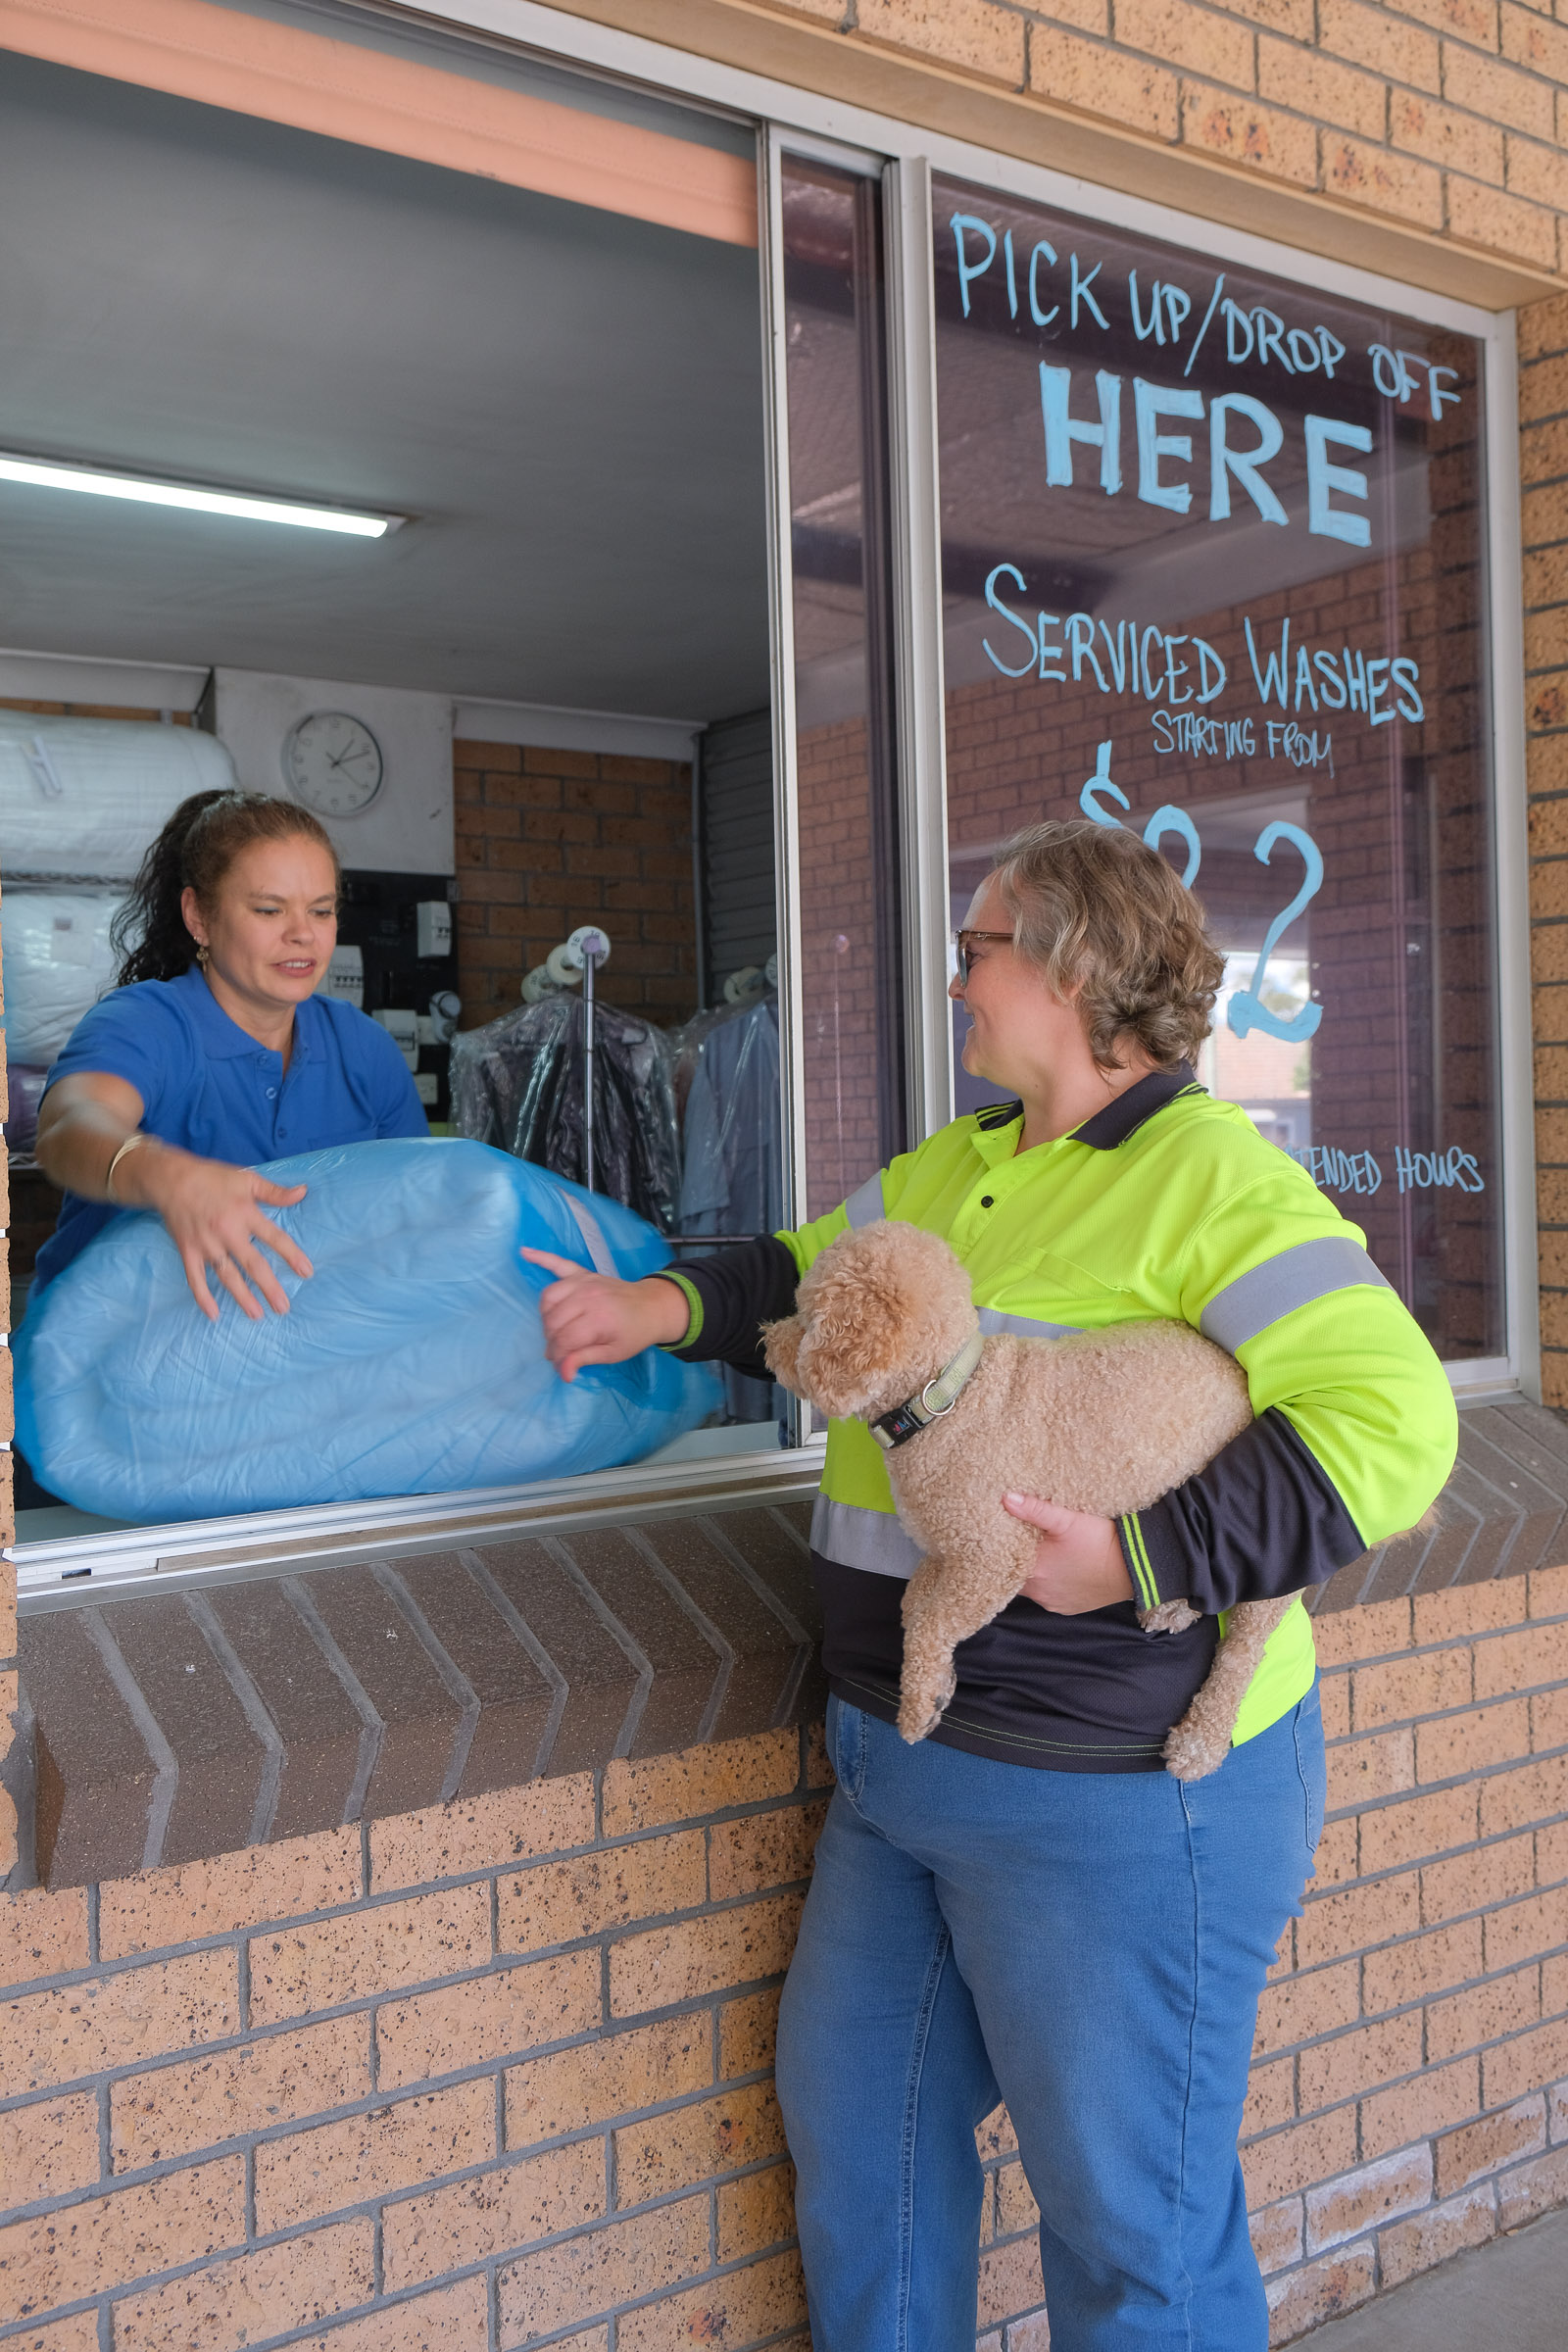 Customer picking up clean doona from laundry pickup window and attendant